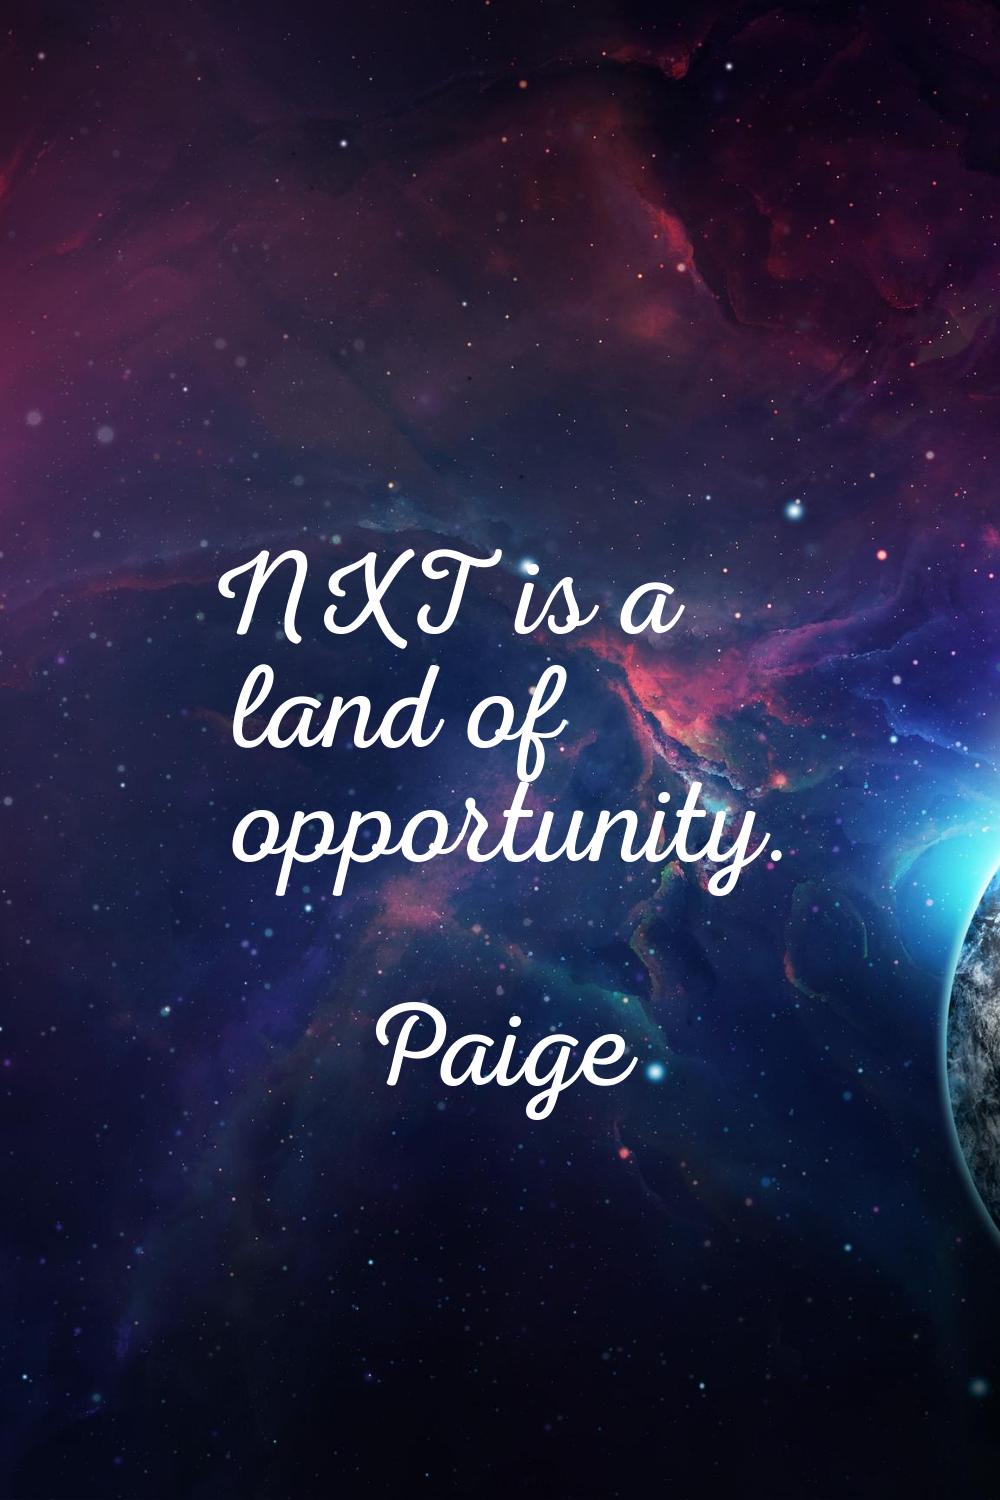 NXT is a land of opportunity.